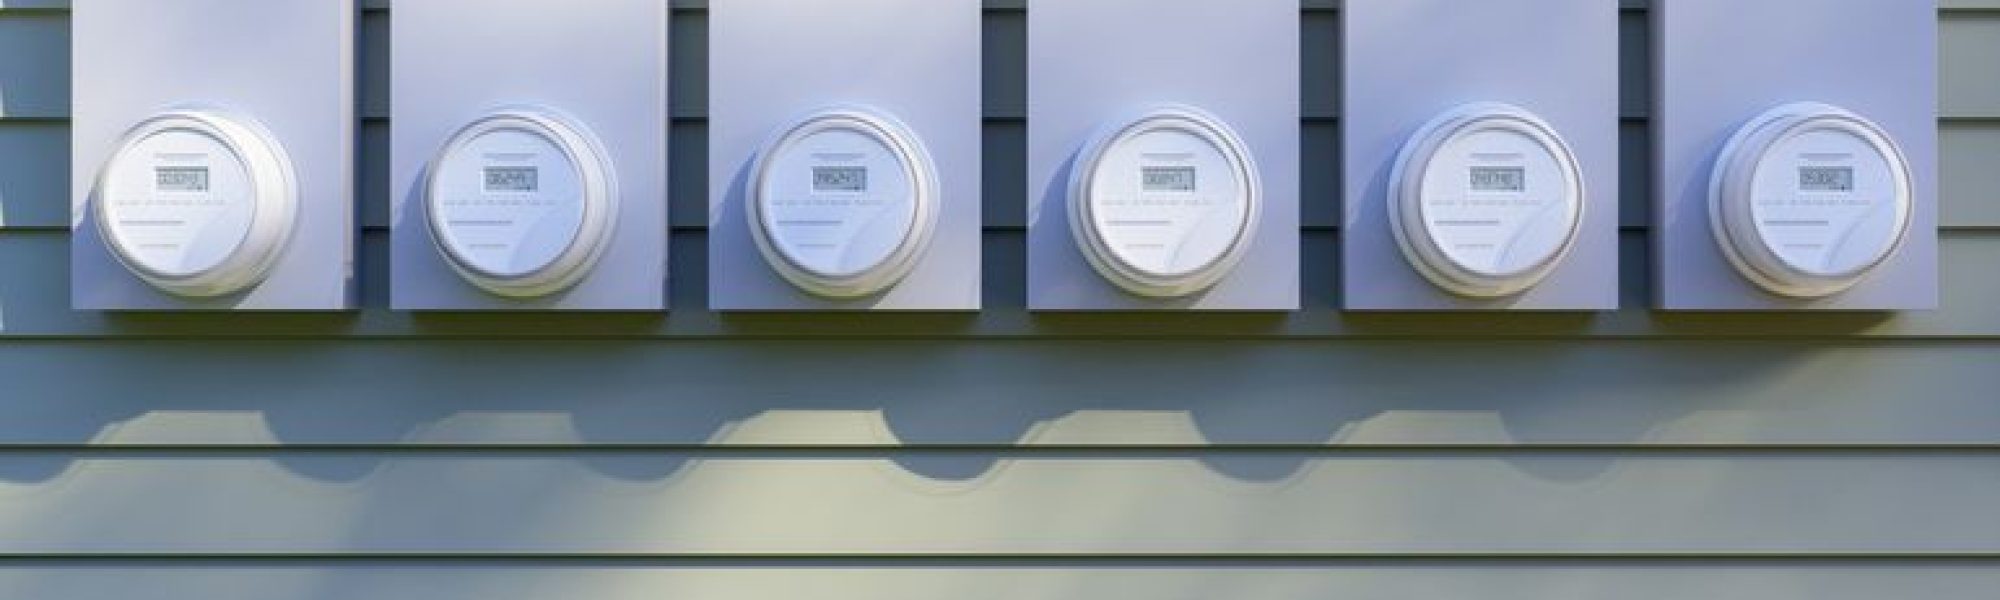 97% of smart meters fail to provide promised customer benefits. Can $3B in new funding change that?